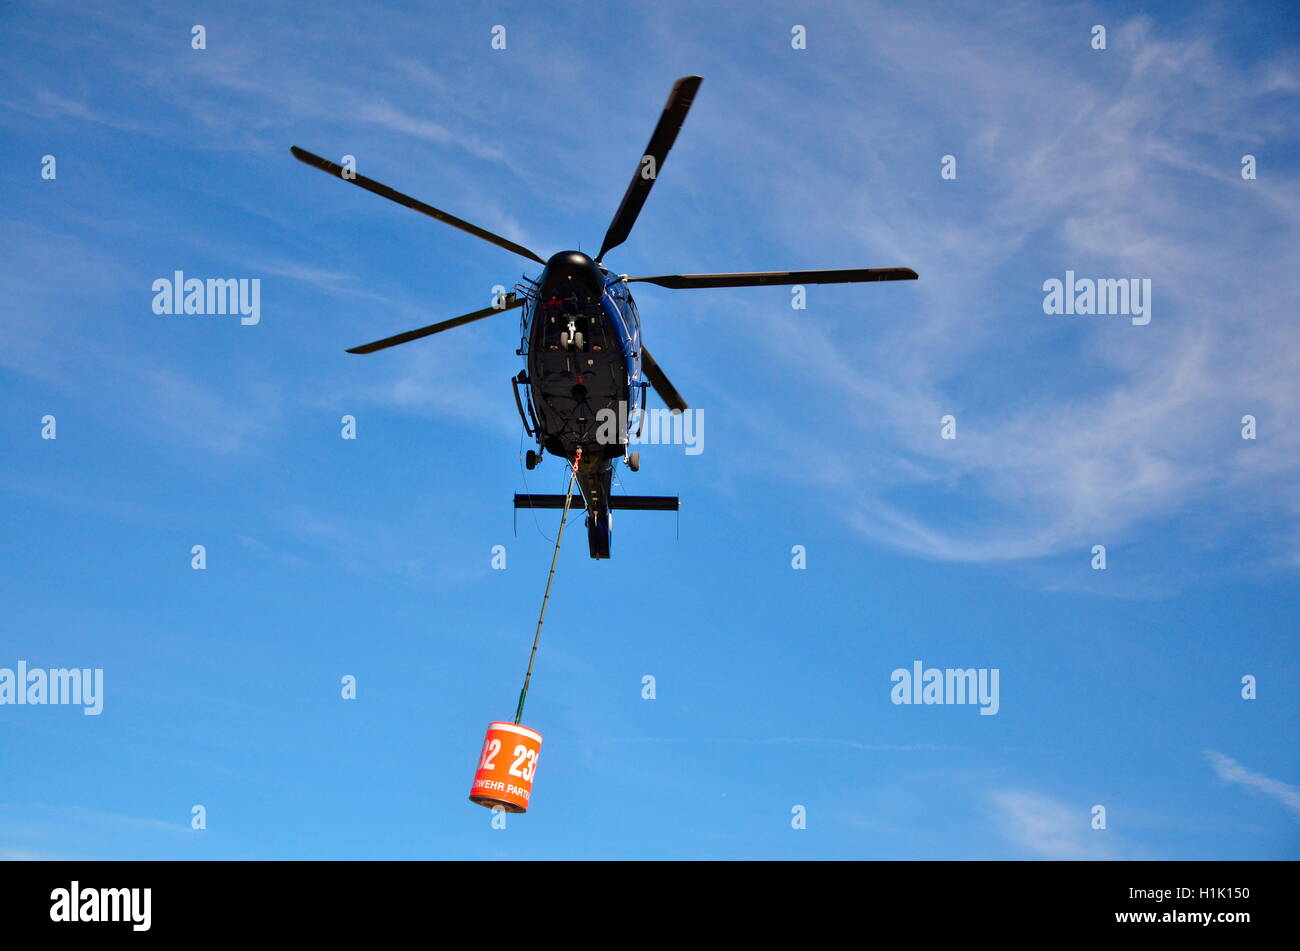 aerial firefighting, police helicopter Stock Photo